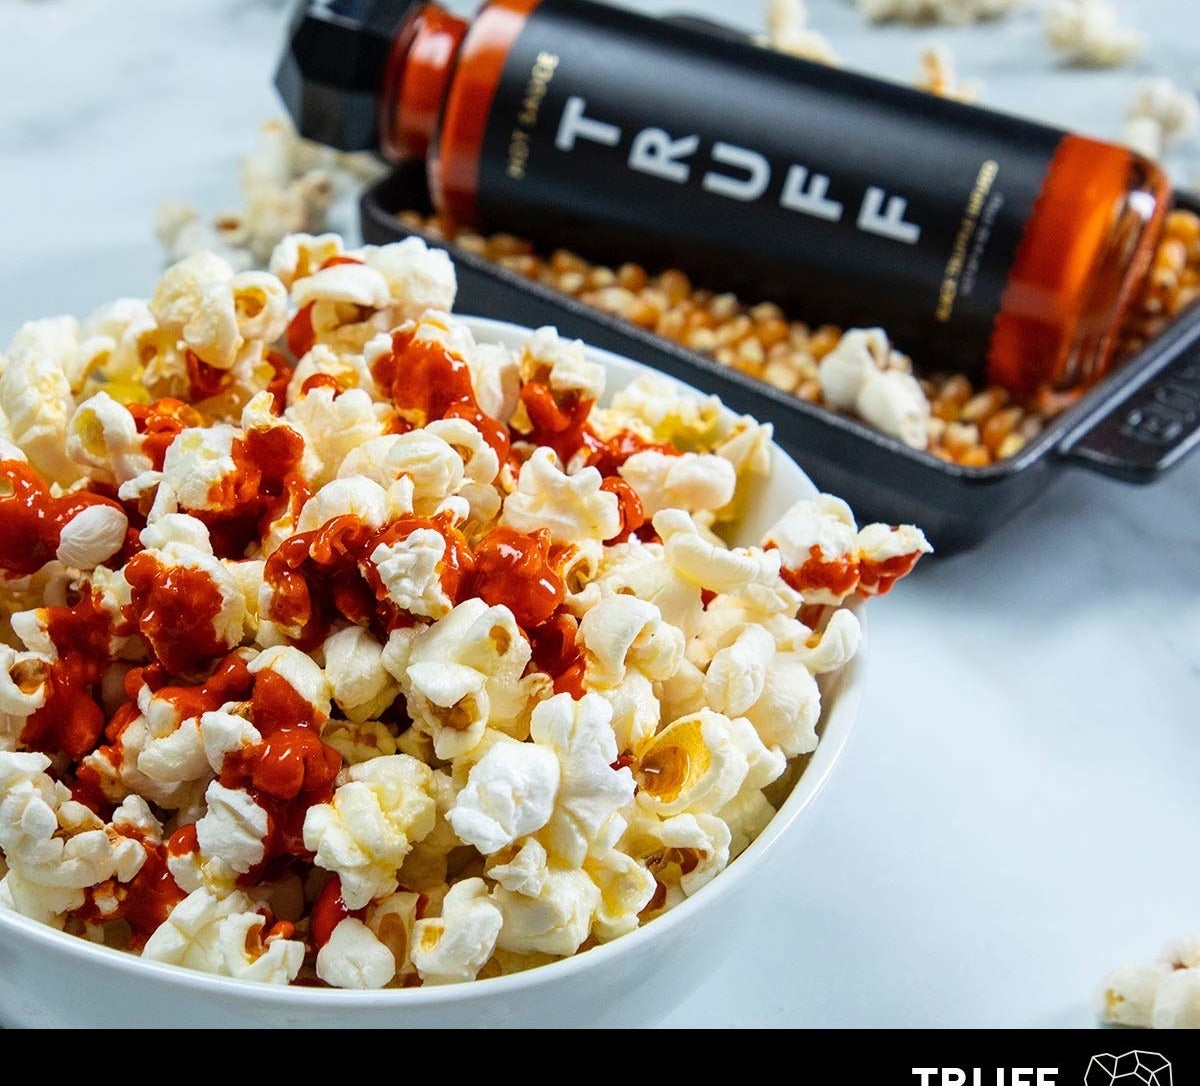 The sauce drizzled on popcorn